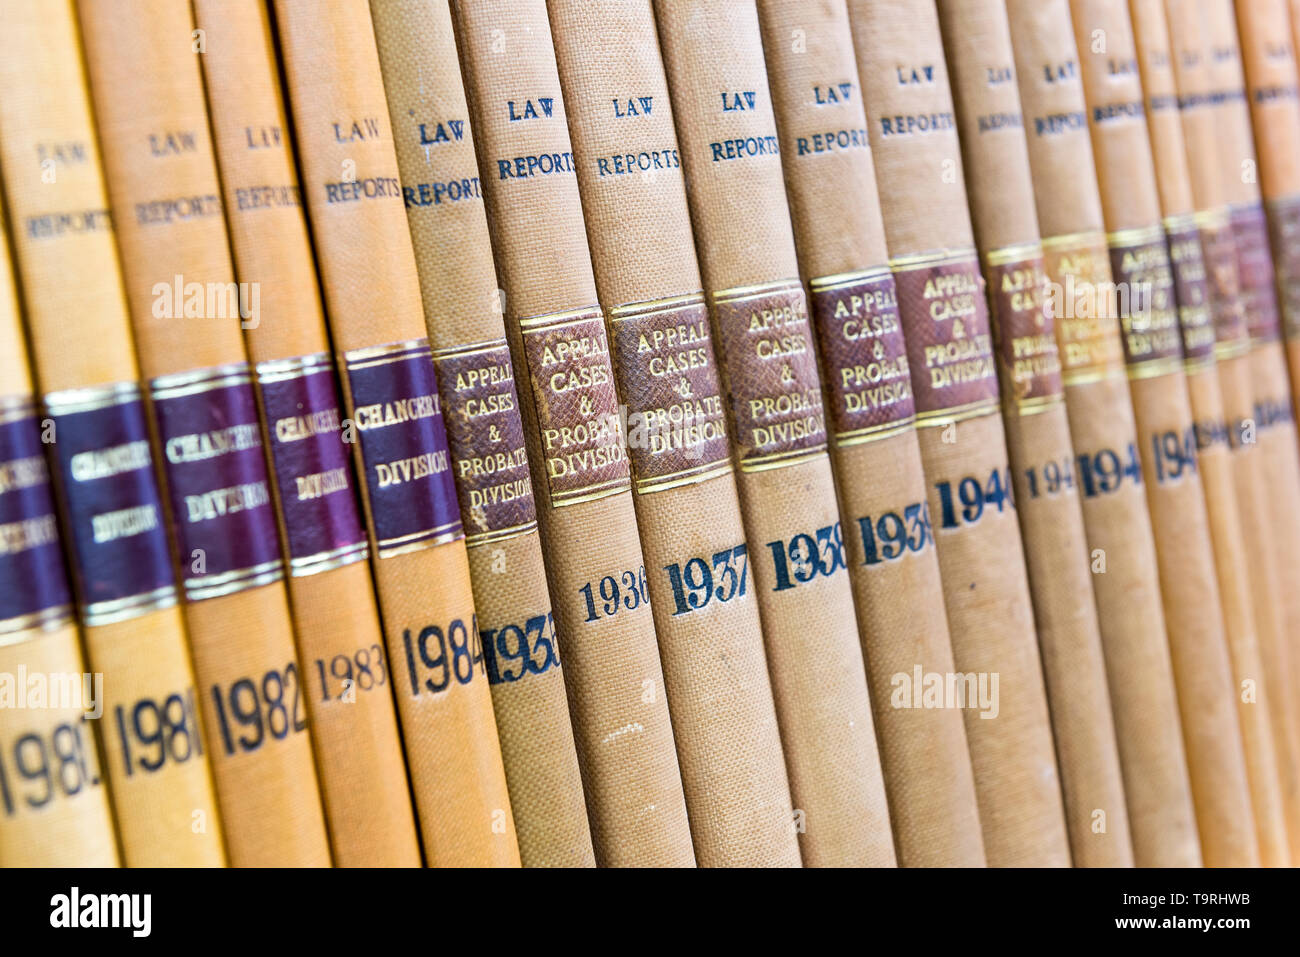 Law reports in book form Stock Photo